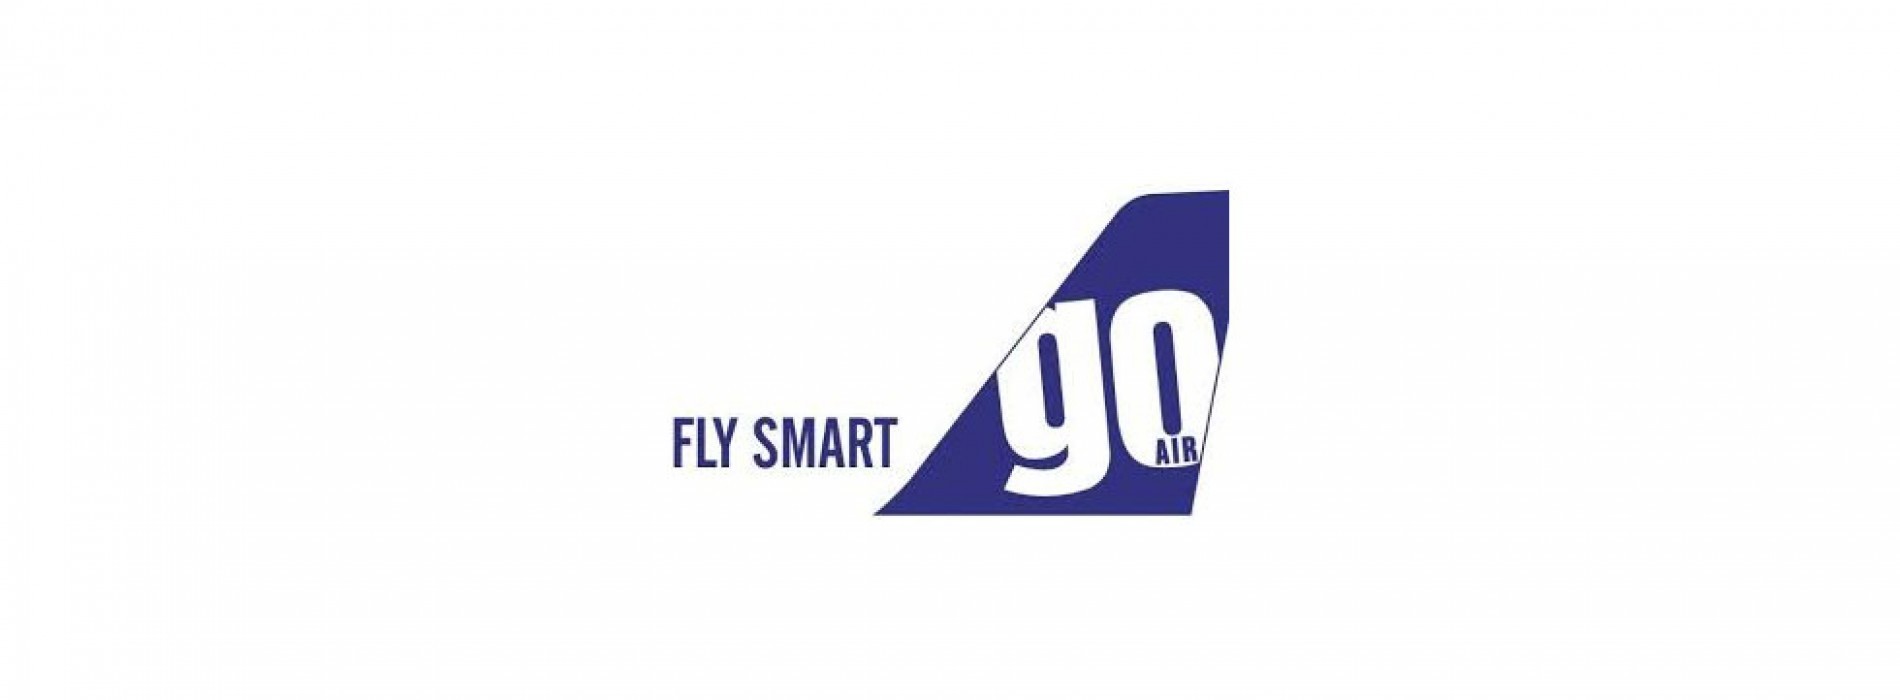 GoAir appoints Cornelis Vrieswijk as the new CEO